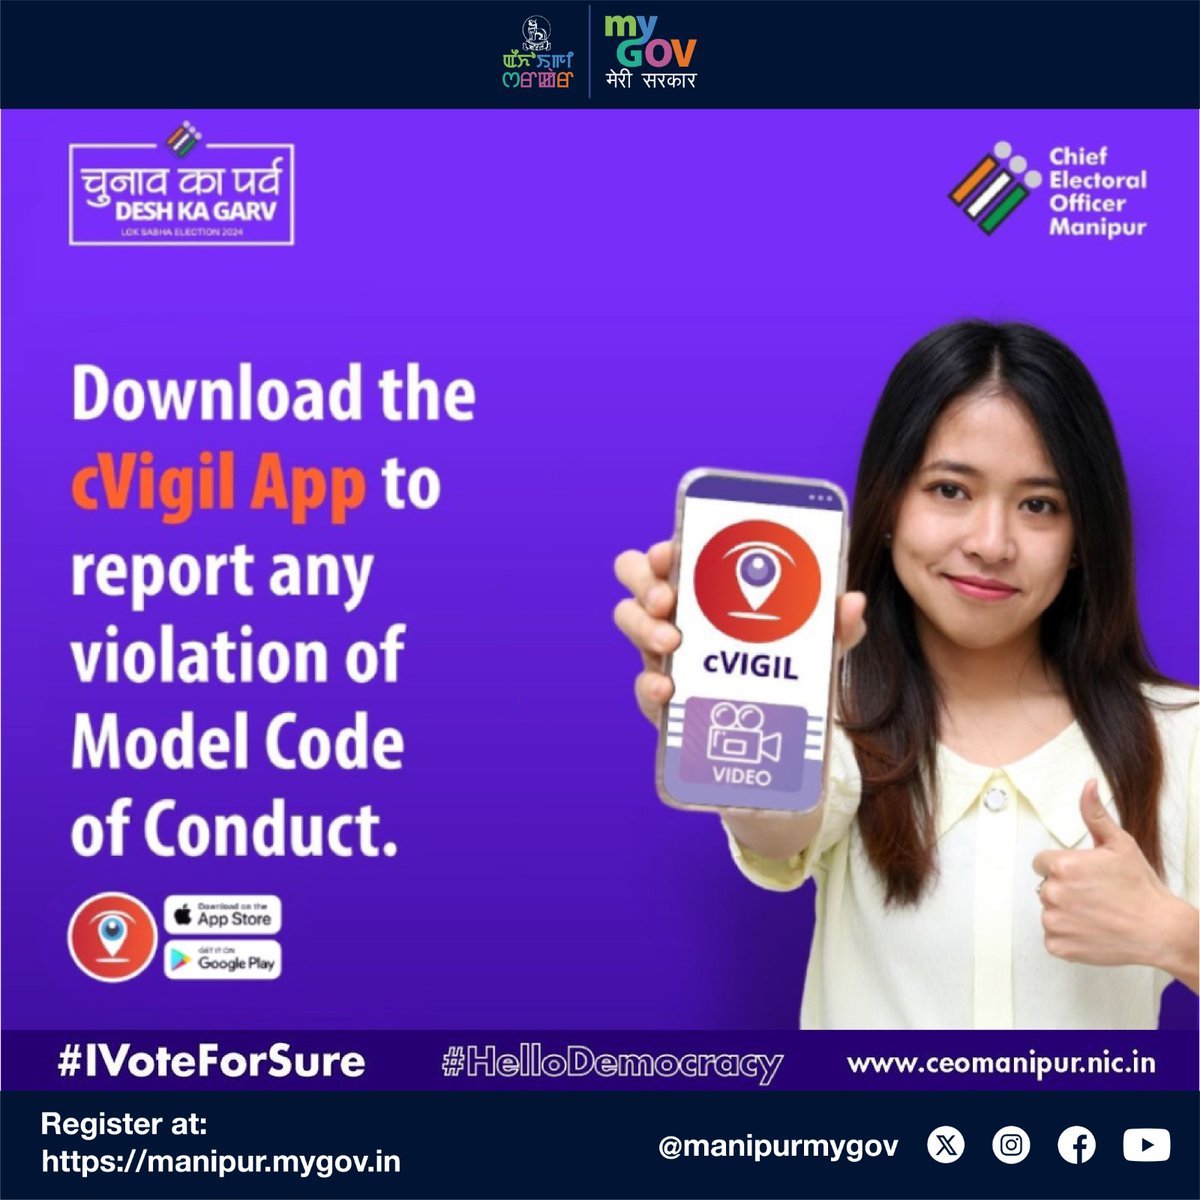 Attention, citizens! 
Your smartphone is now a powerful tool for democracy. Download cVigil, and report violations of Model Code of Conduct in real-time. Let's build a transparent electoral process together!
#ChunavKaParv #DeshKaGarv #Elections2024 #IVote4Sure #HelloDemocracy